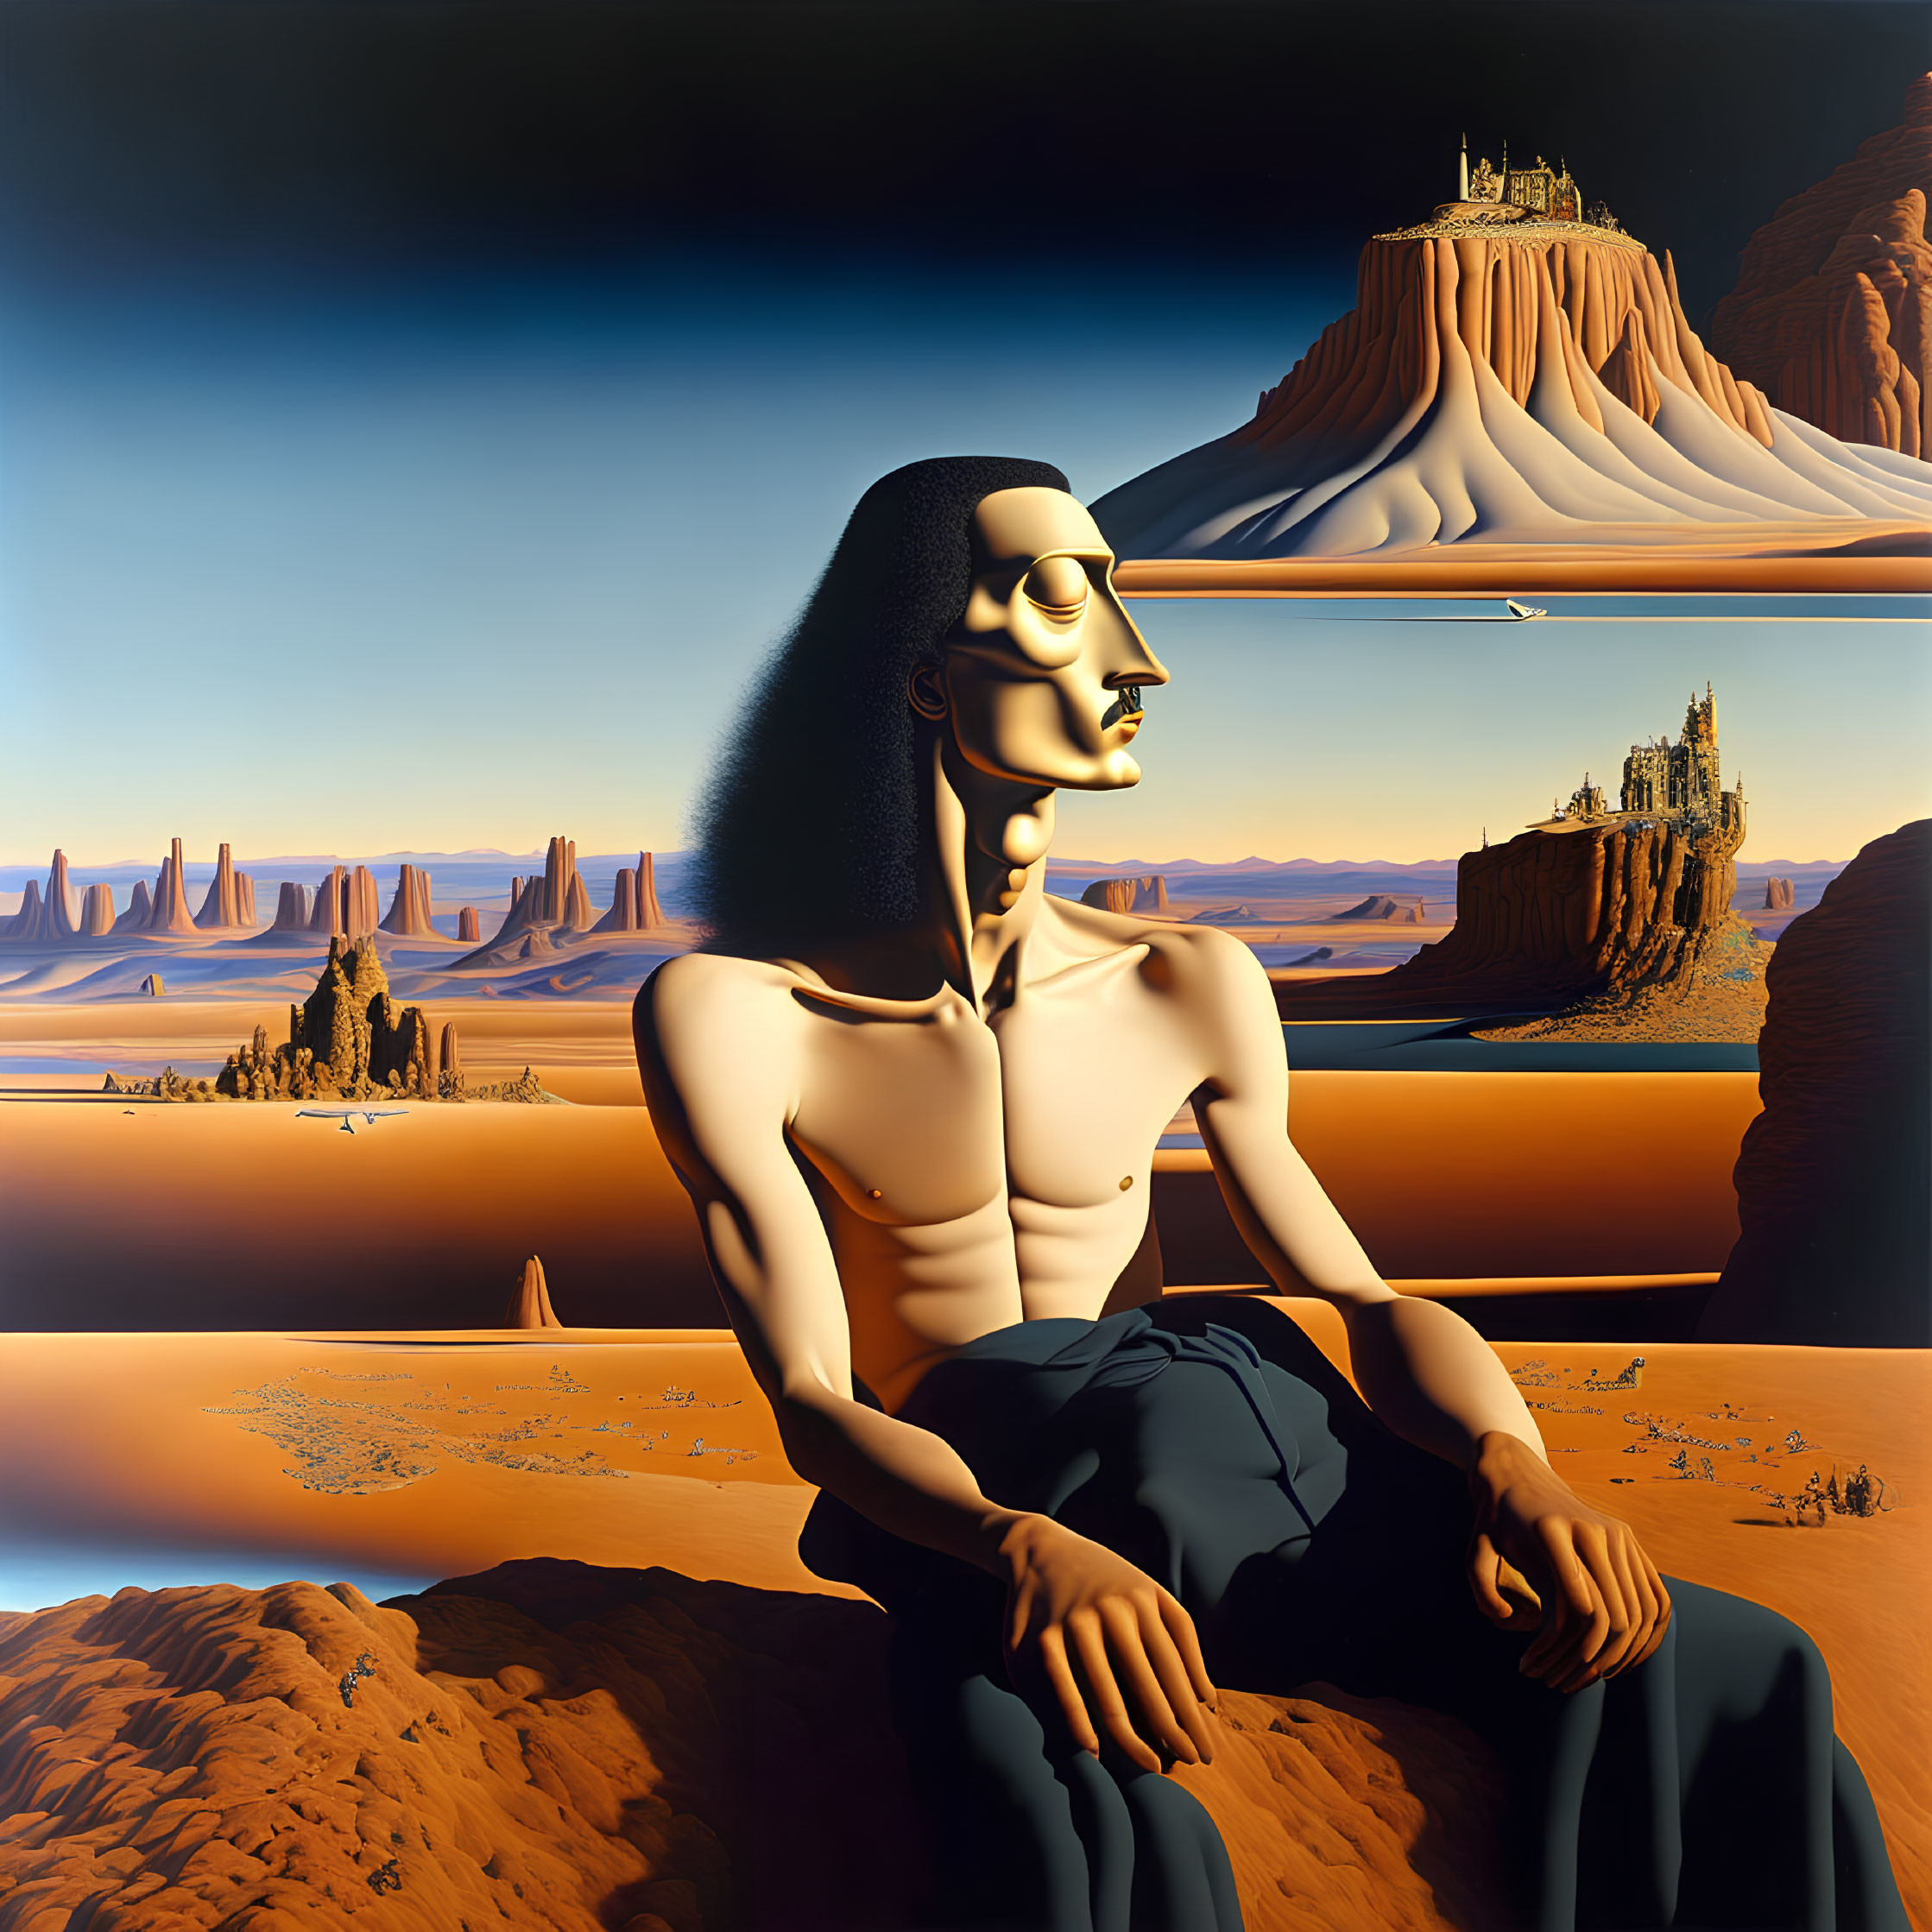 Surreal painting of muscular figure in desert landscape